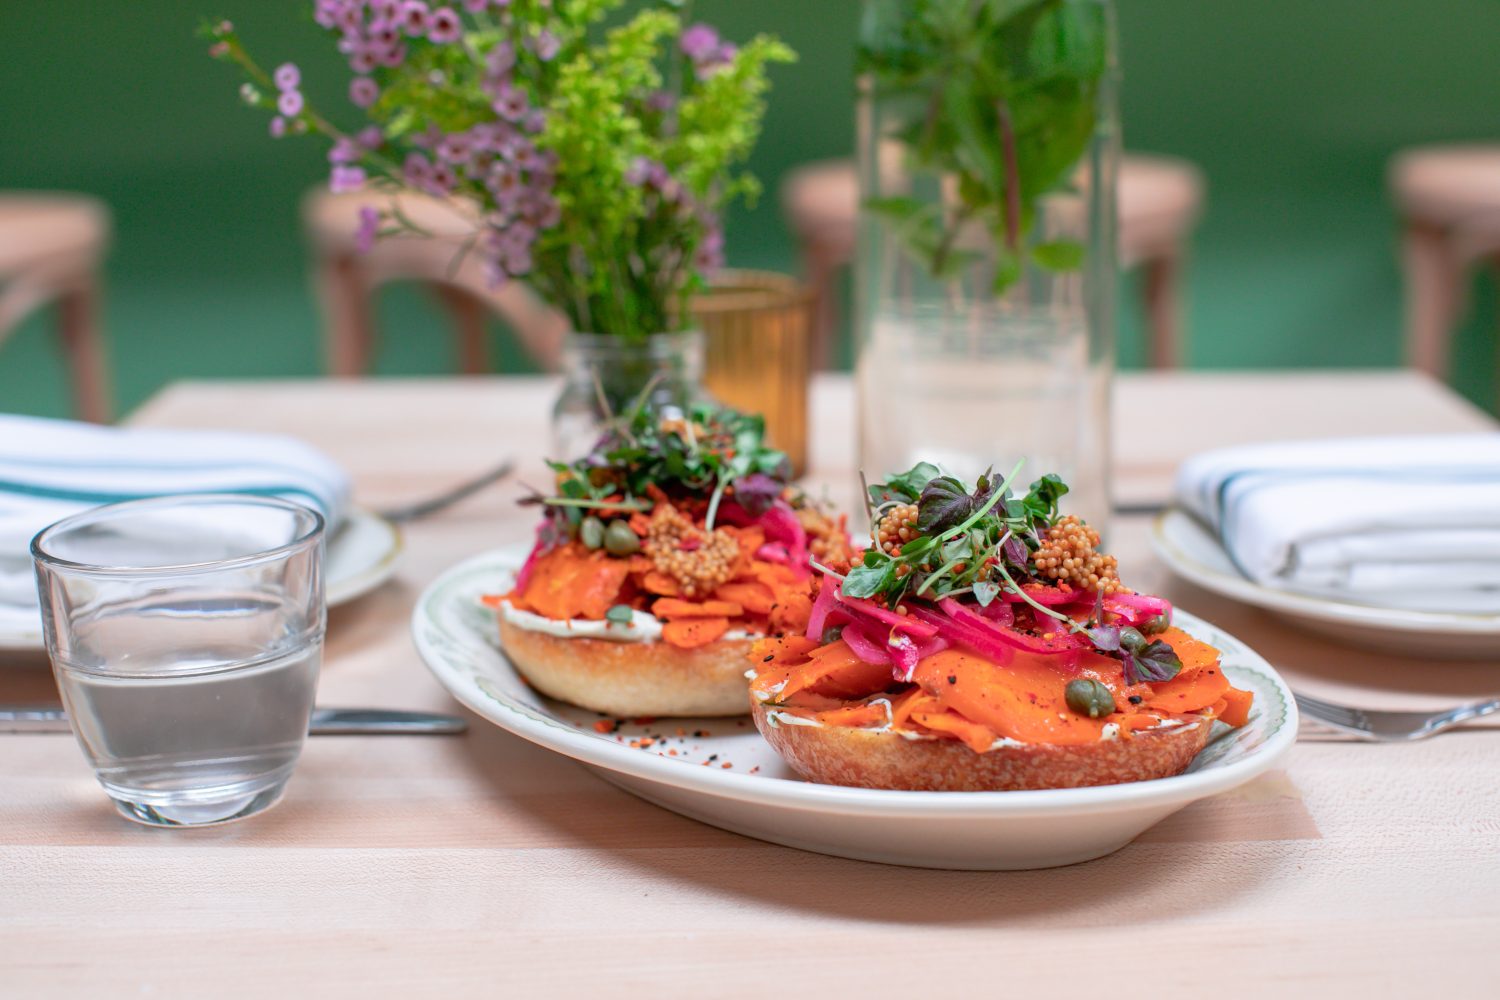 bagels with lox and capers on a white plate, plant on the table